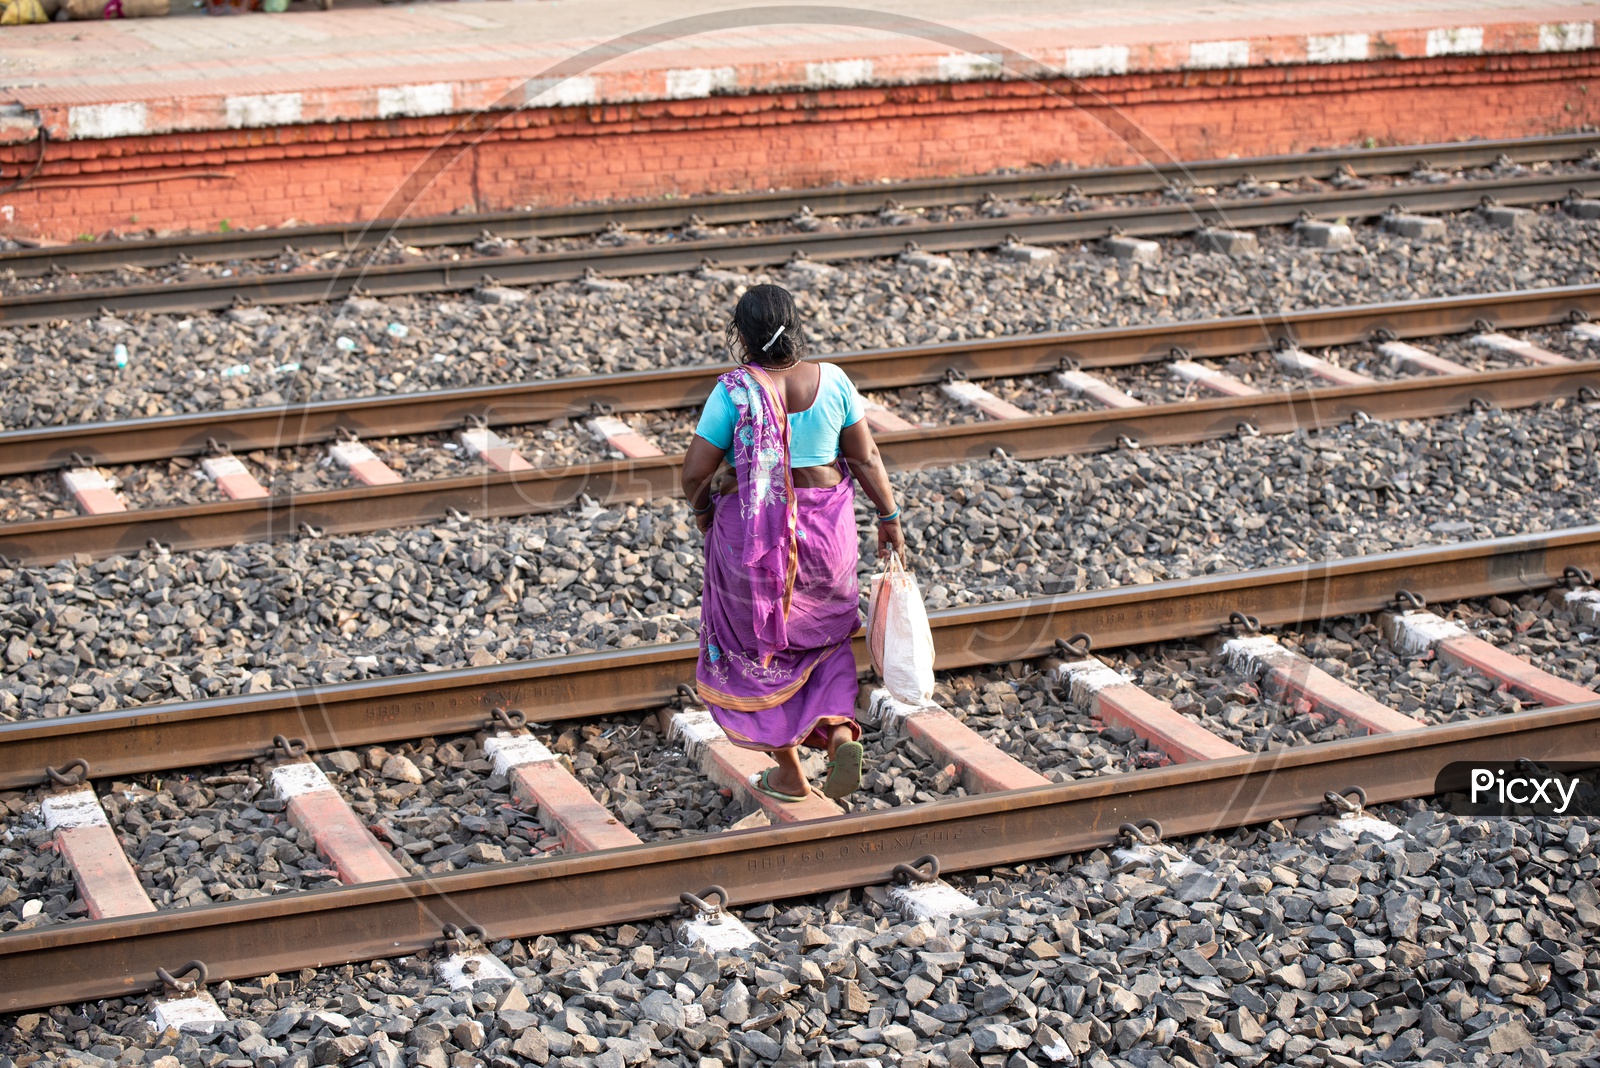 An Indian Woman Or Passenger  Crossing the railway Tracks At a Railway Station